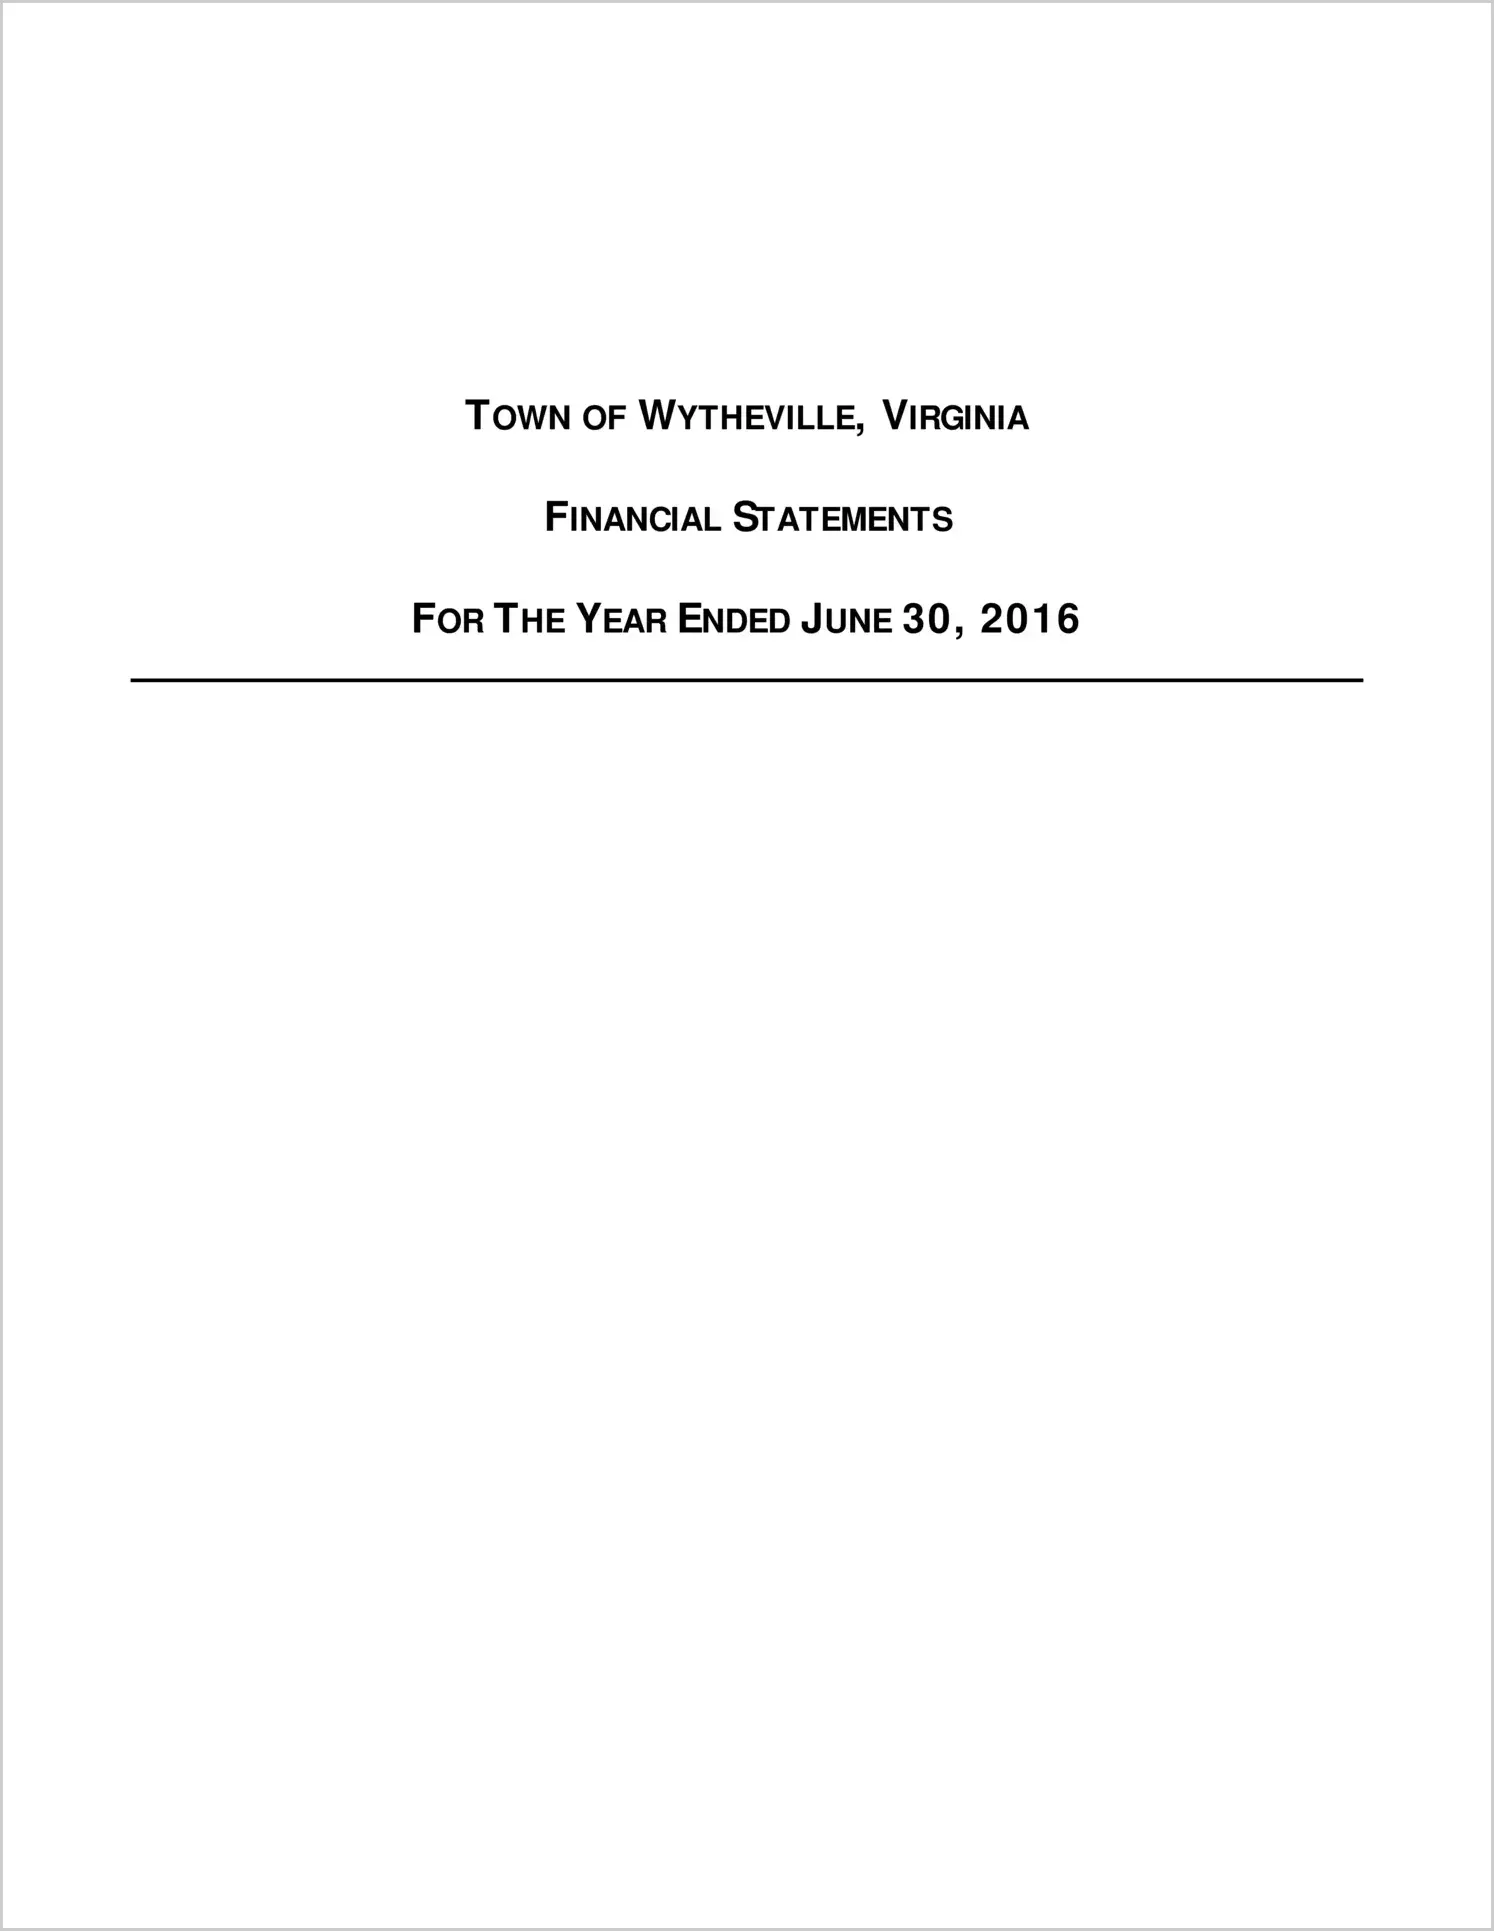 2016 Annual Financial Report for Town of Wytheville